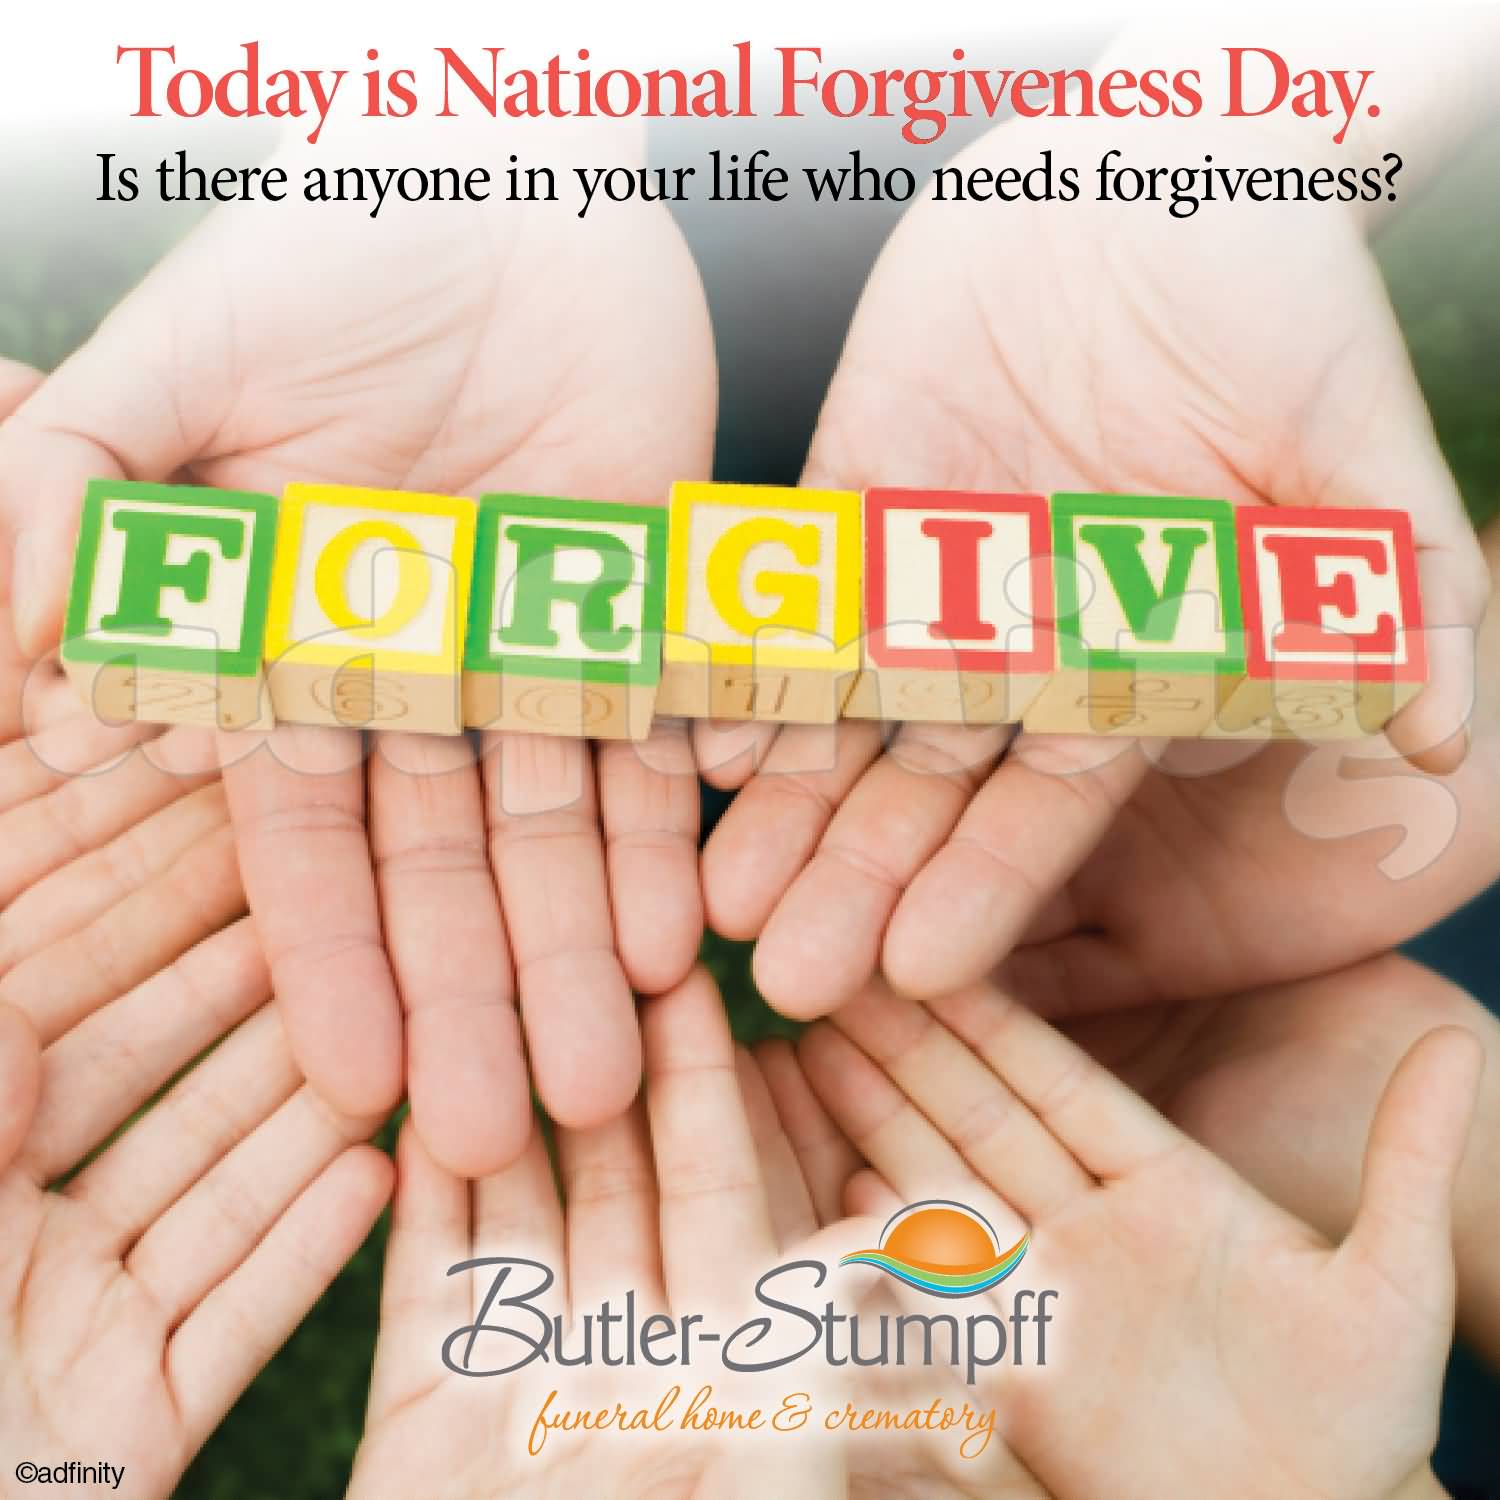 Today Is National Forgiveness Day - Forgive